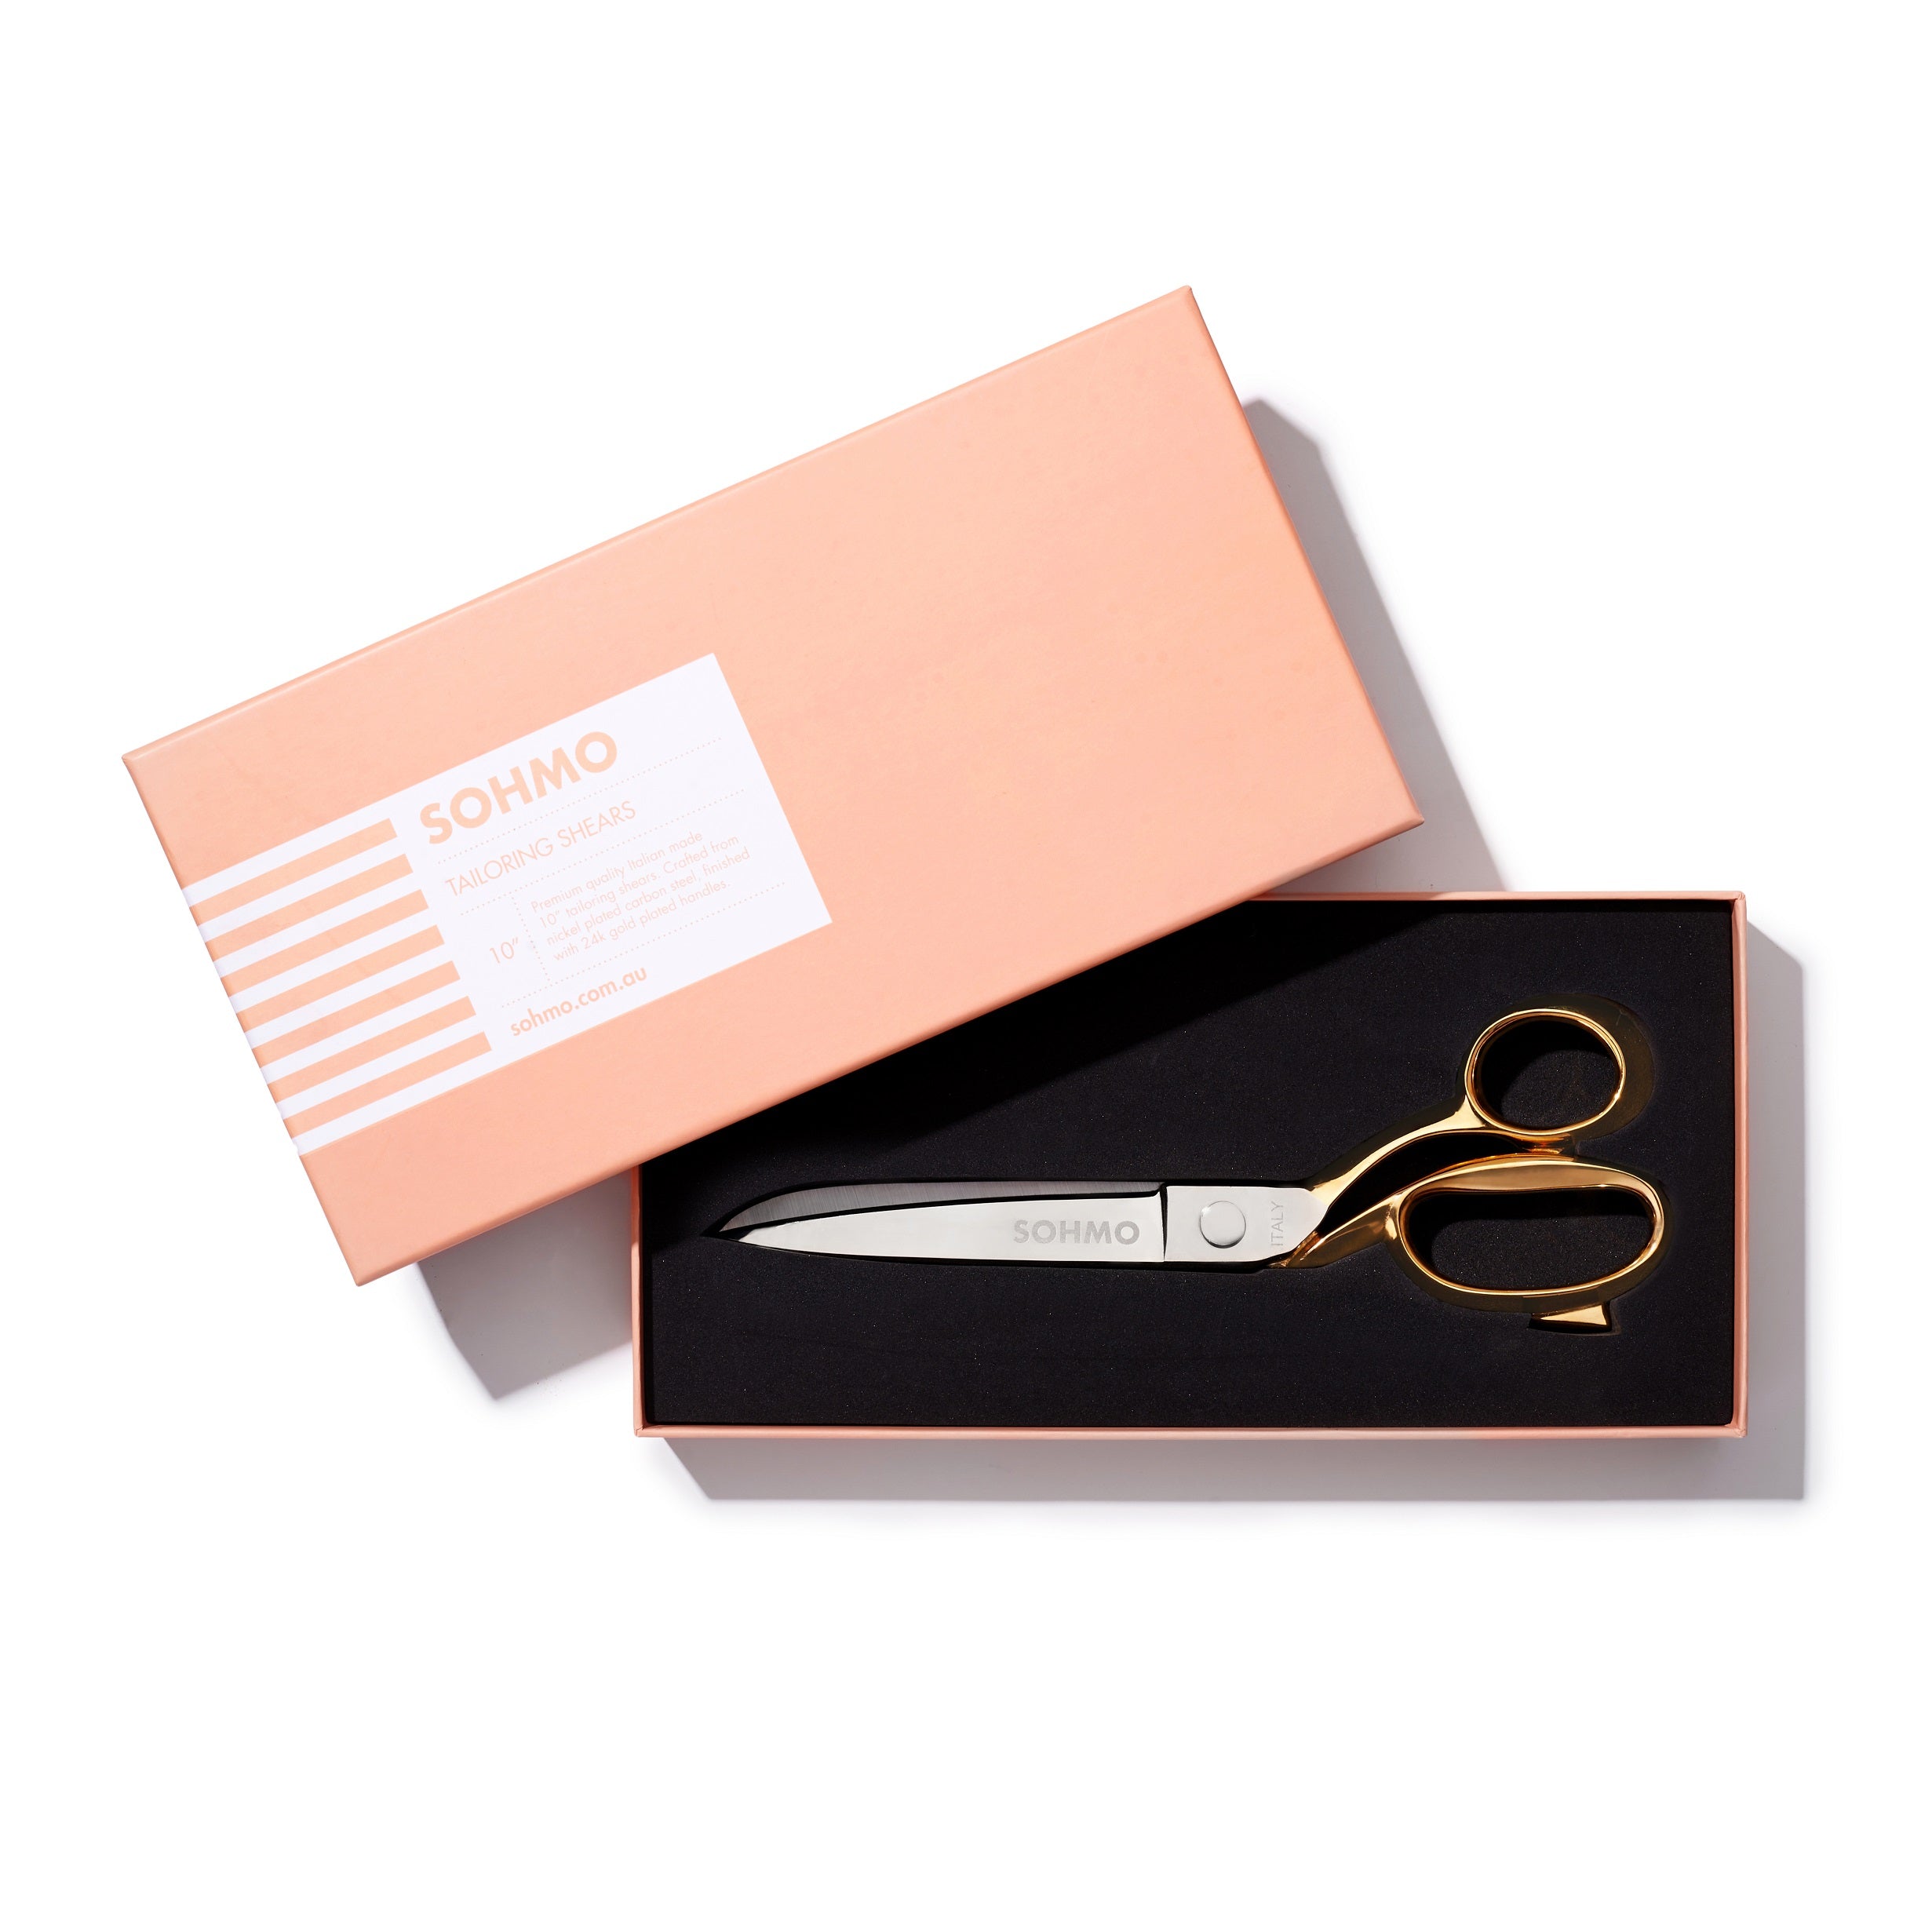 SOHMO Large Sewing Scissors in protective box